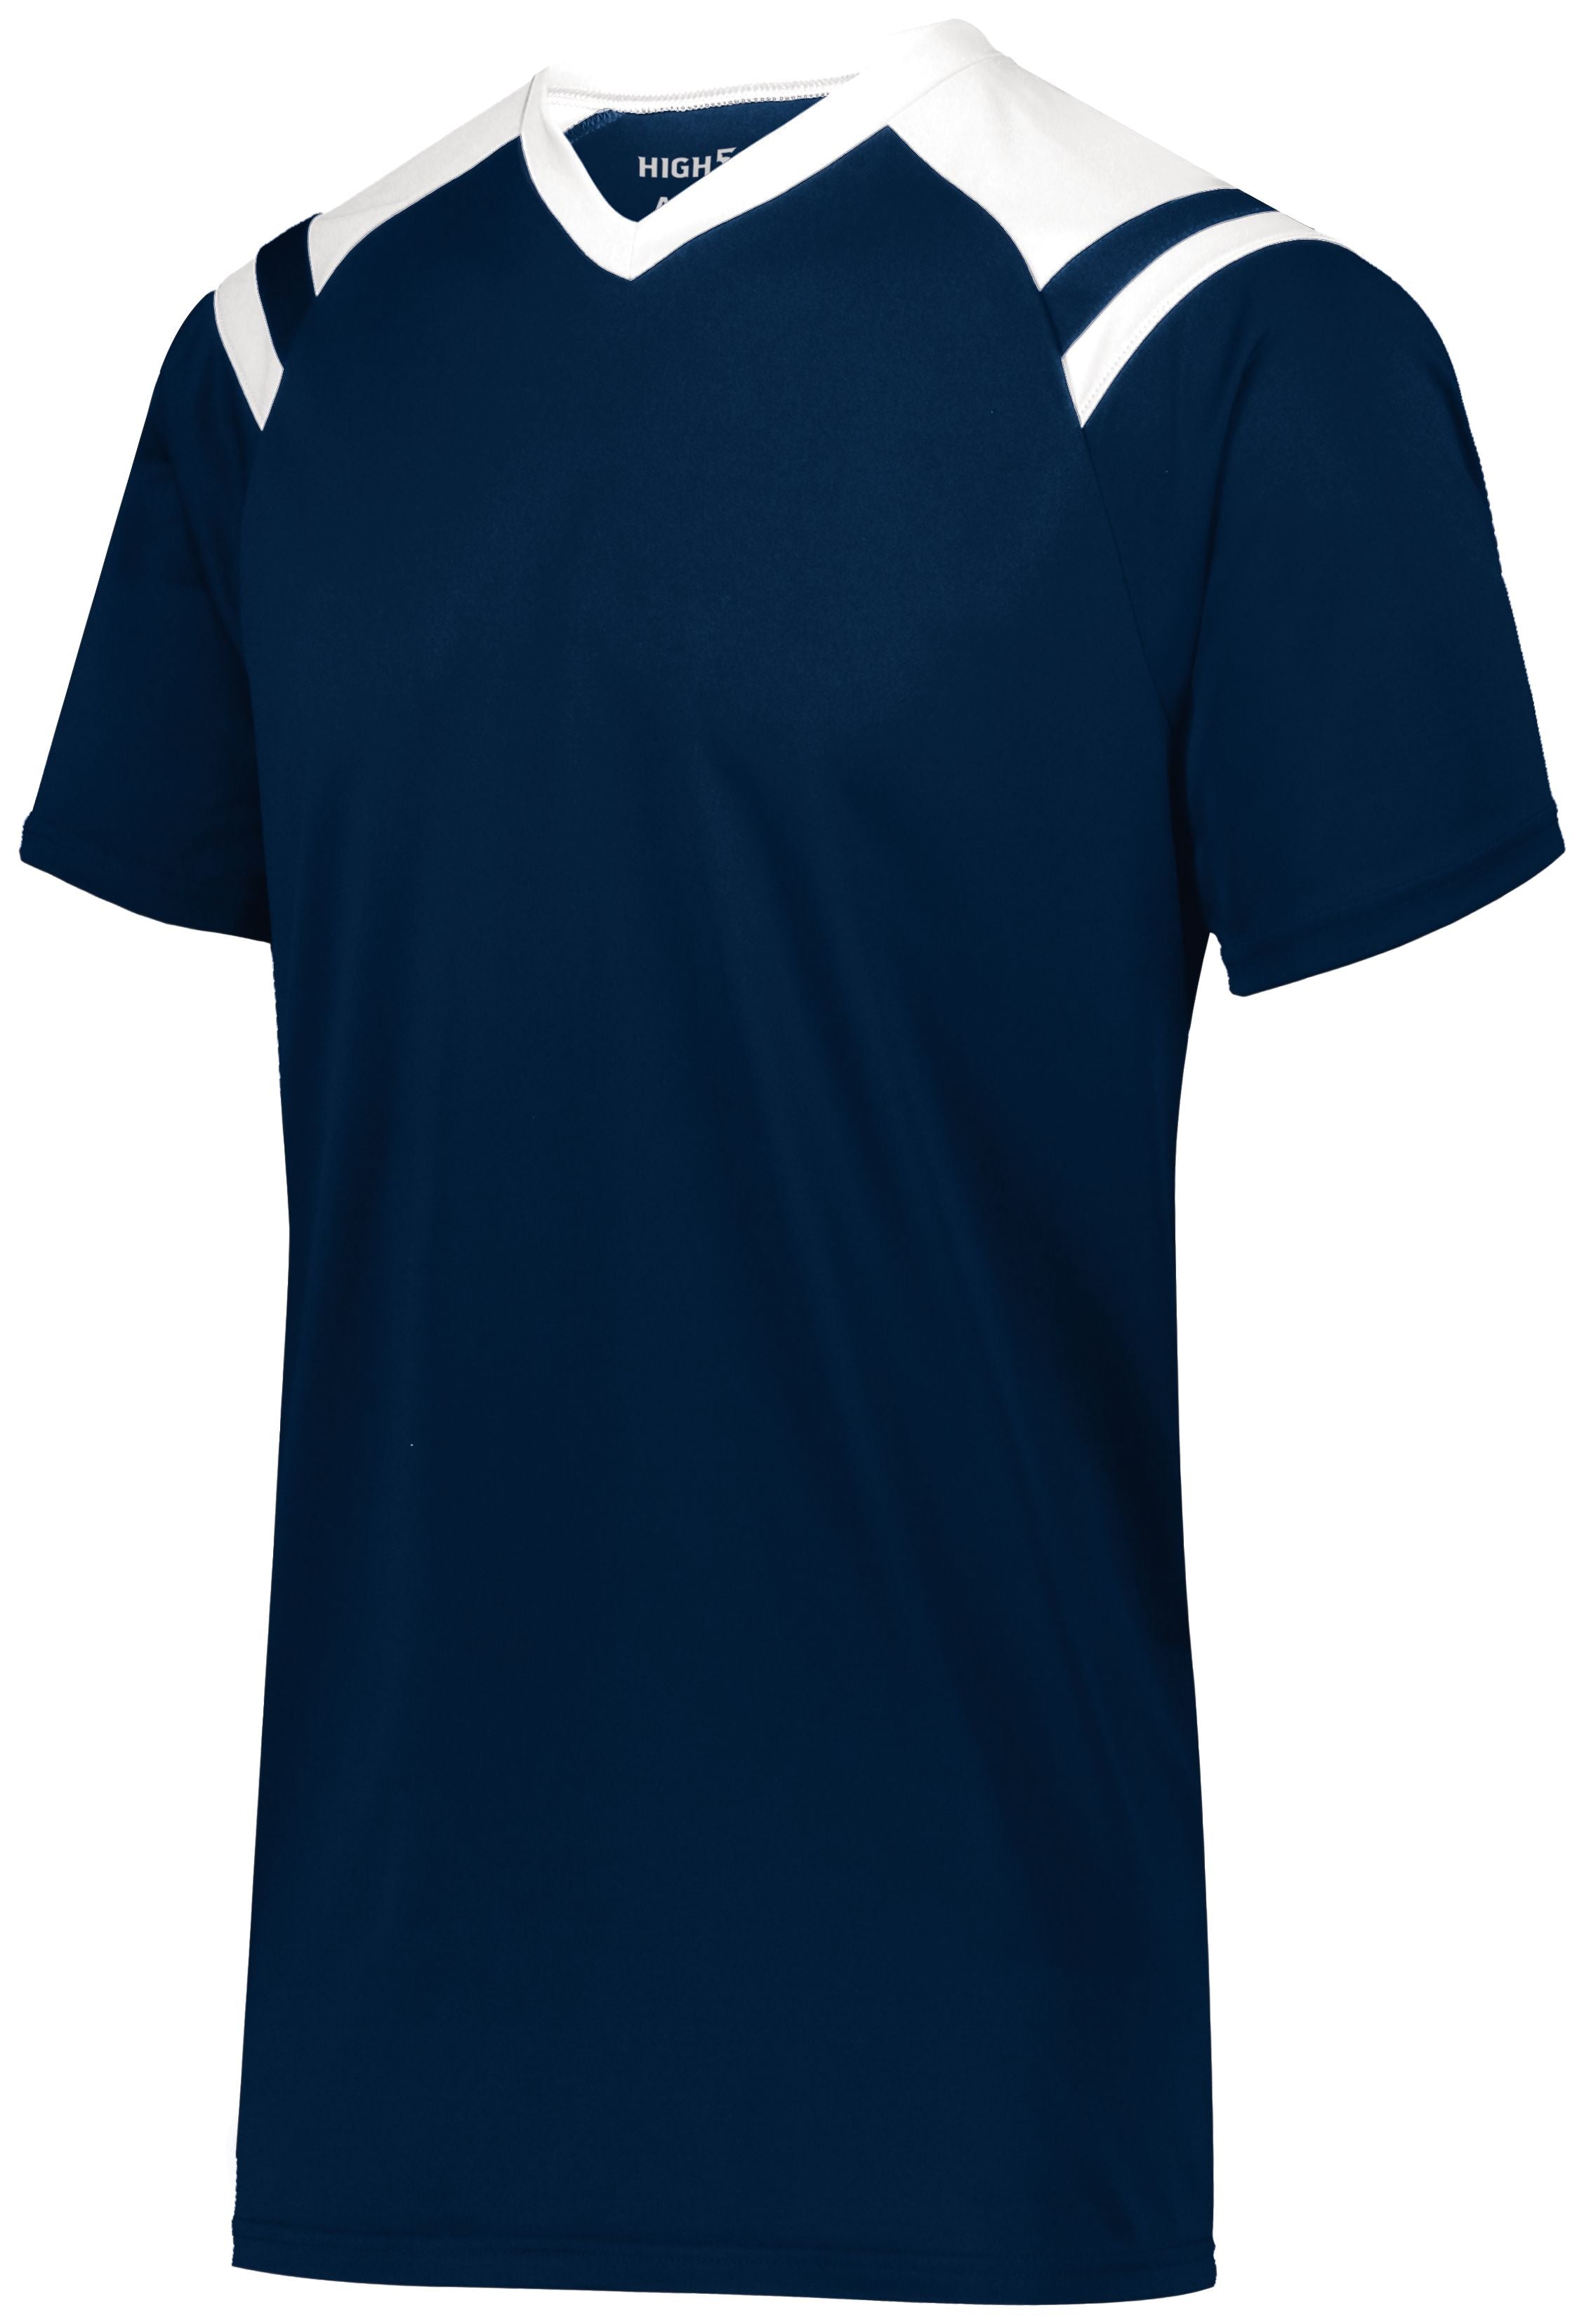 High 5 Sheffield Jersey in Navy/White  -Part of the Adult, Adult-Jersey, High5-Products, Soccer, Shirts, All-Sports-1, Sheffield-Soccer-Jerseys product lines at KanaleyCreations.com